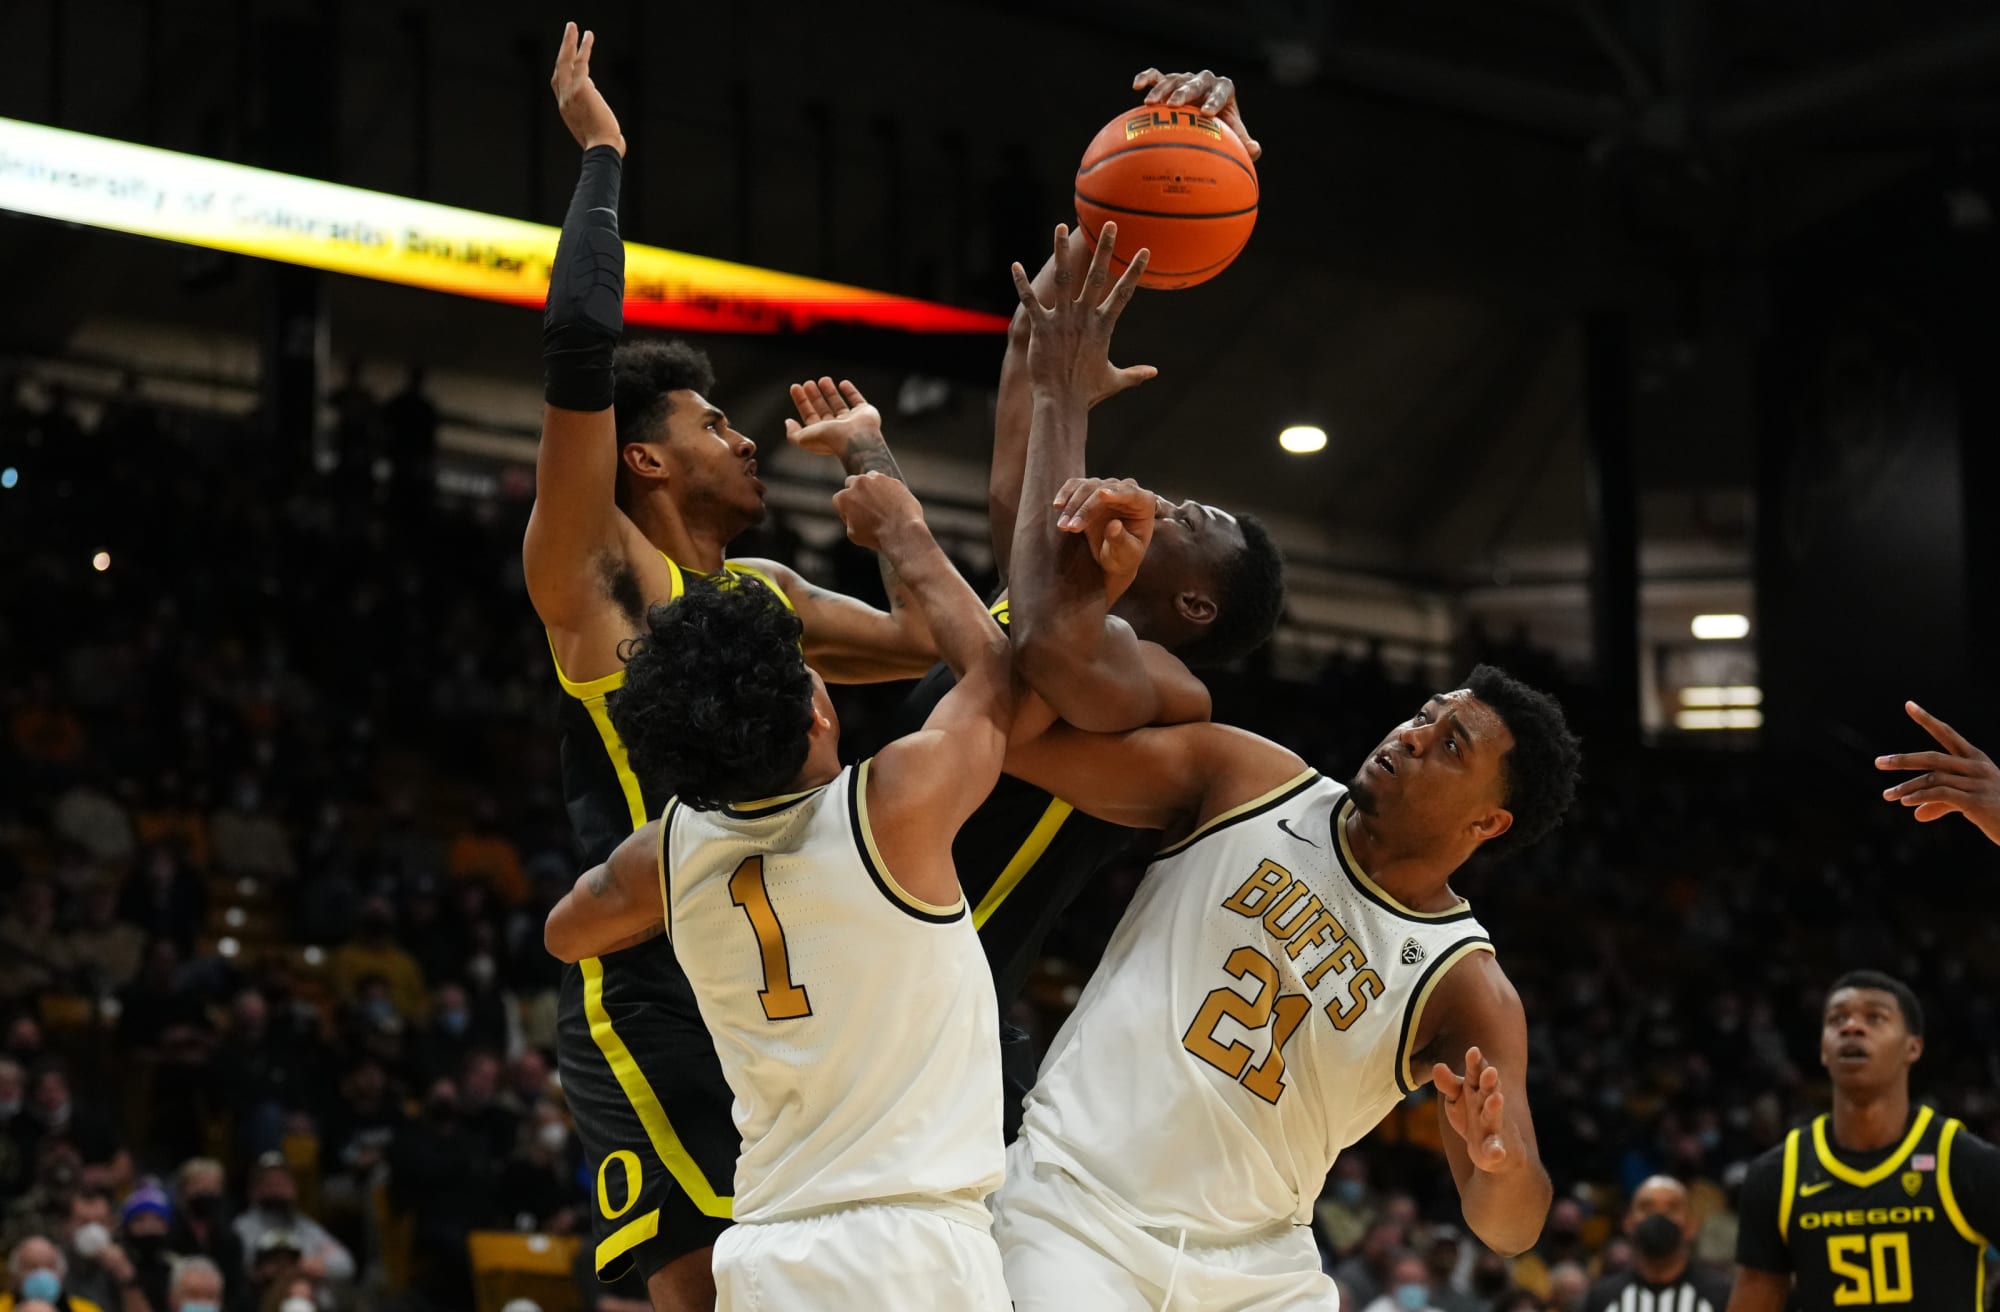 Oregon Ducks earn first win ever in Boulder, rout Colorado Buffaloes 66-51